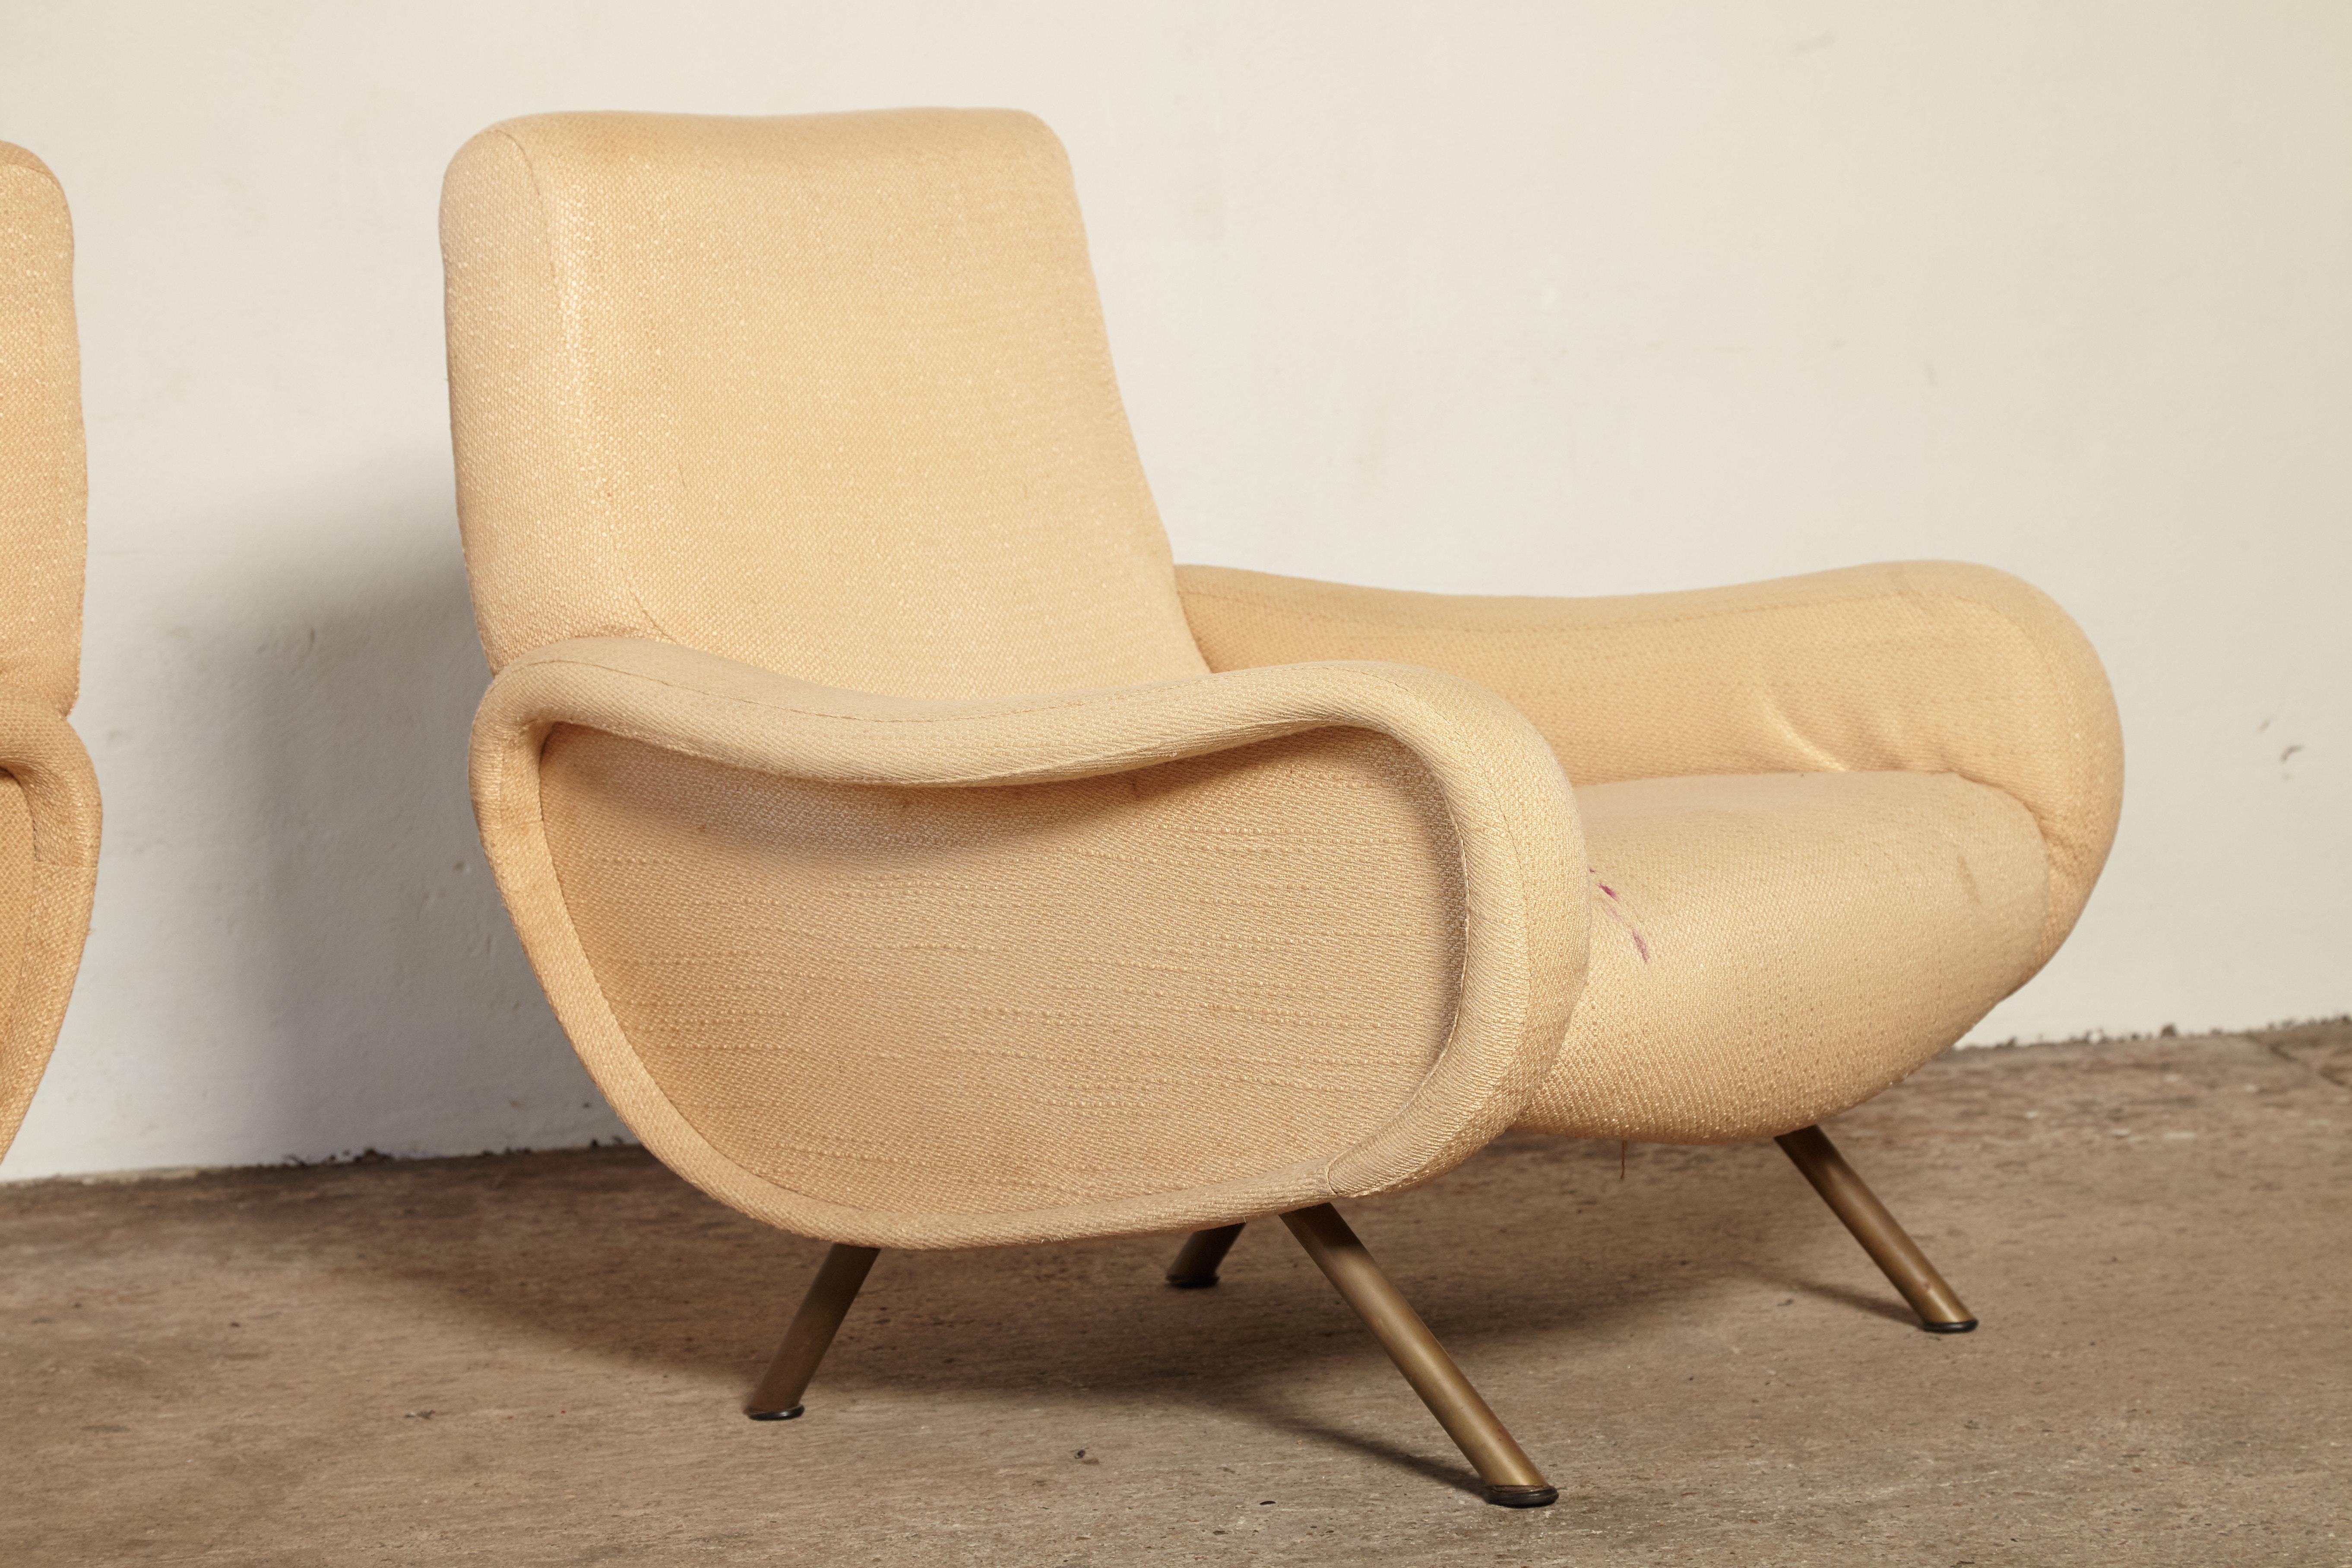 Marco Zanuso Lady Chairs, Arflex, Italy, 1960s 'Complimentary Reupholstery' 1